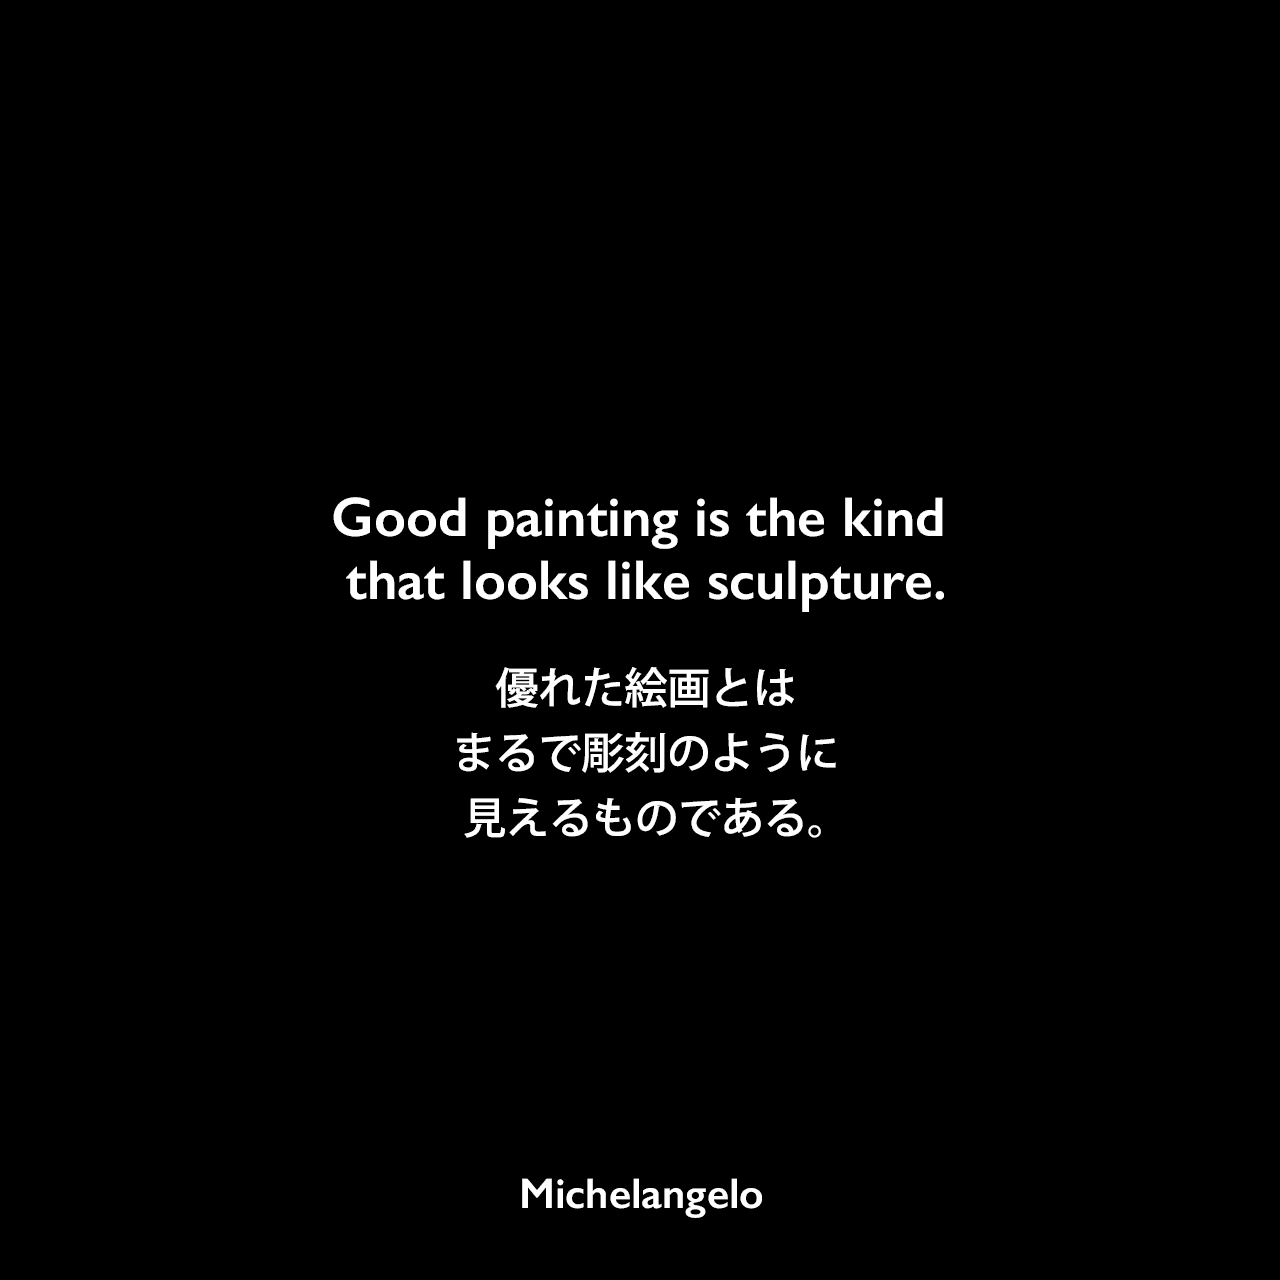 Good painting is the kind that looks like sculpture.優れた絵画とは、まるで彫刻のように見えるものである。Michelangelo